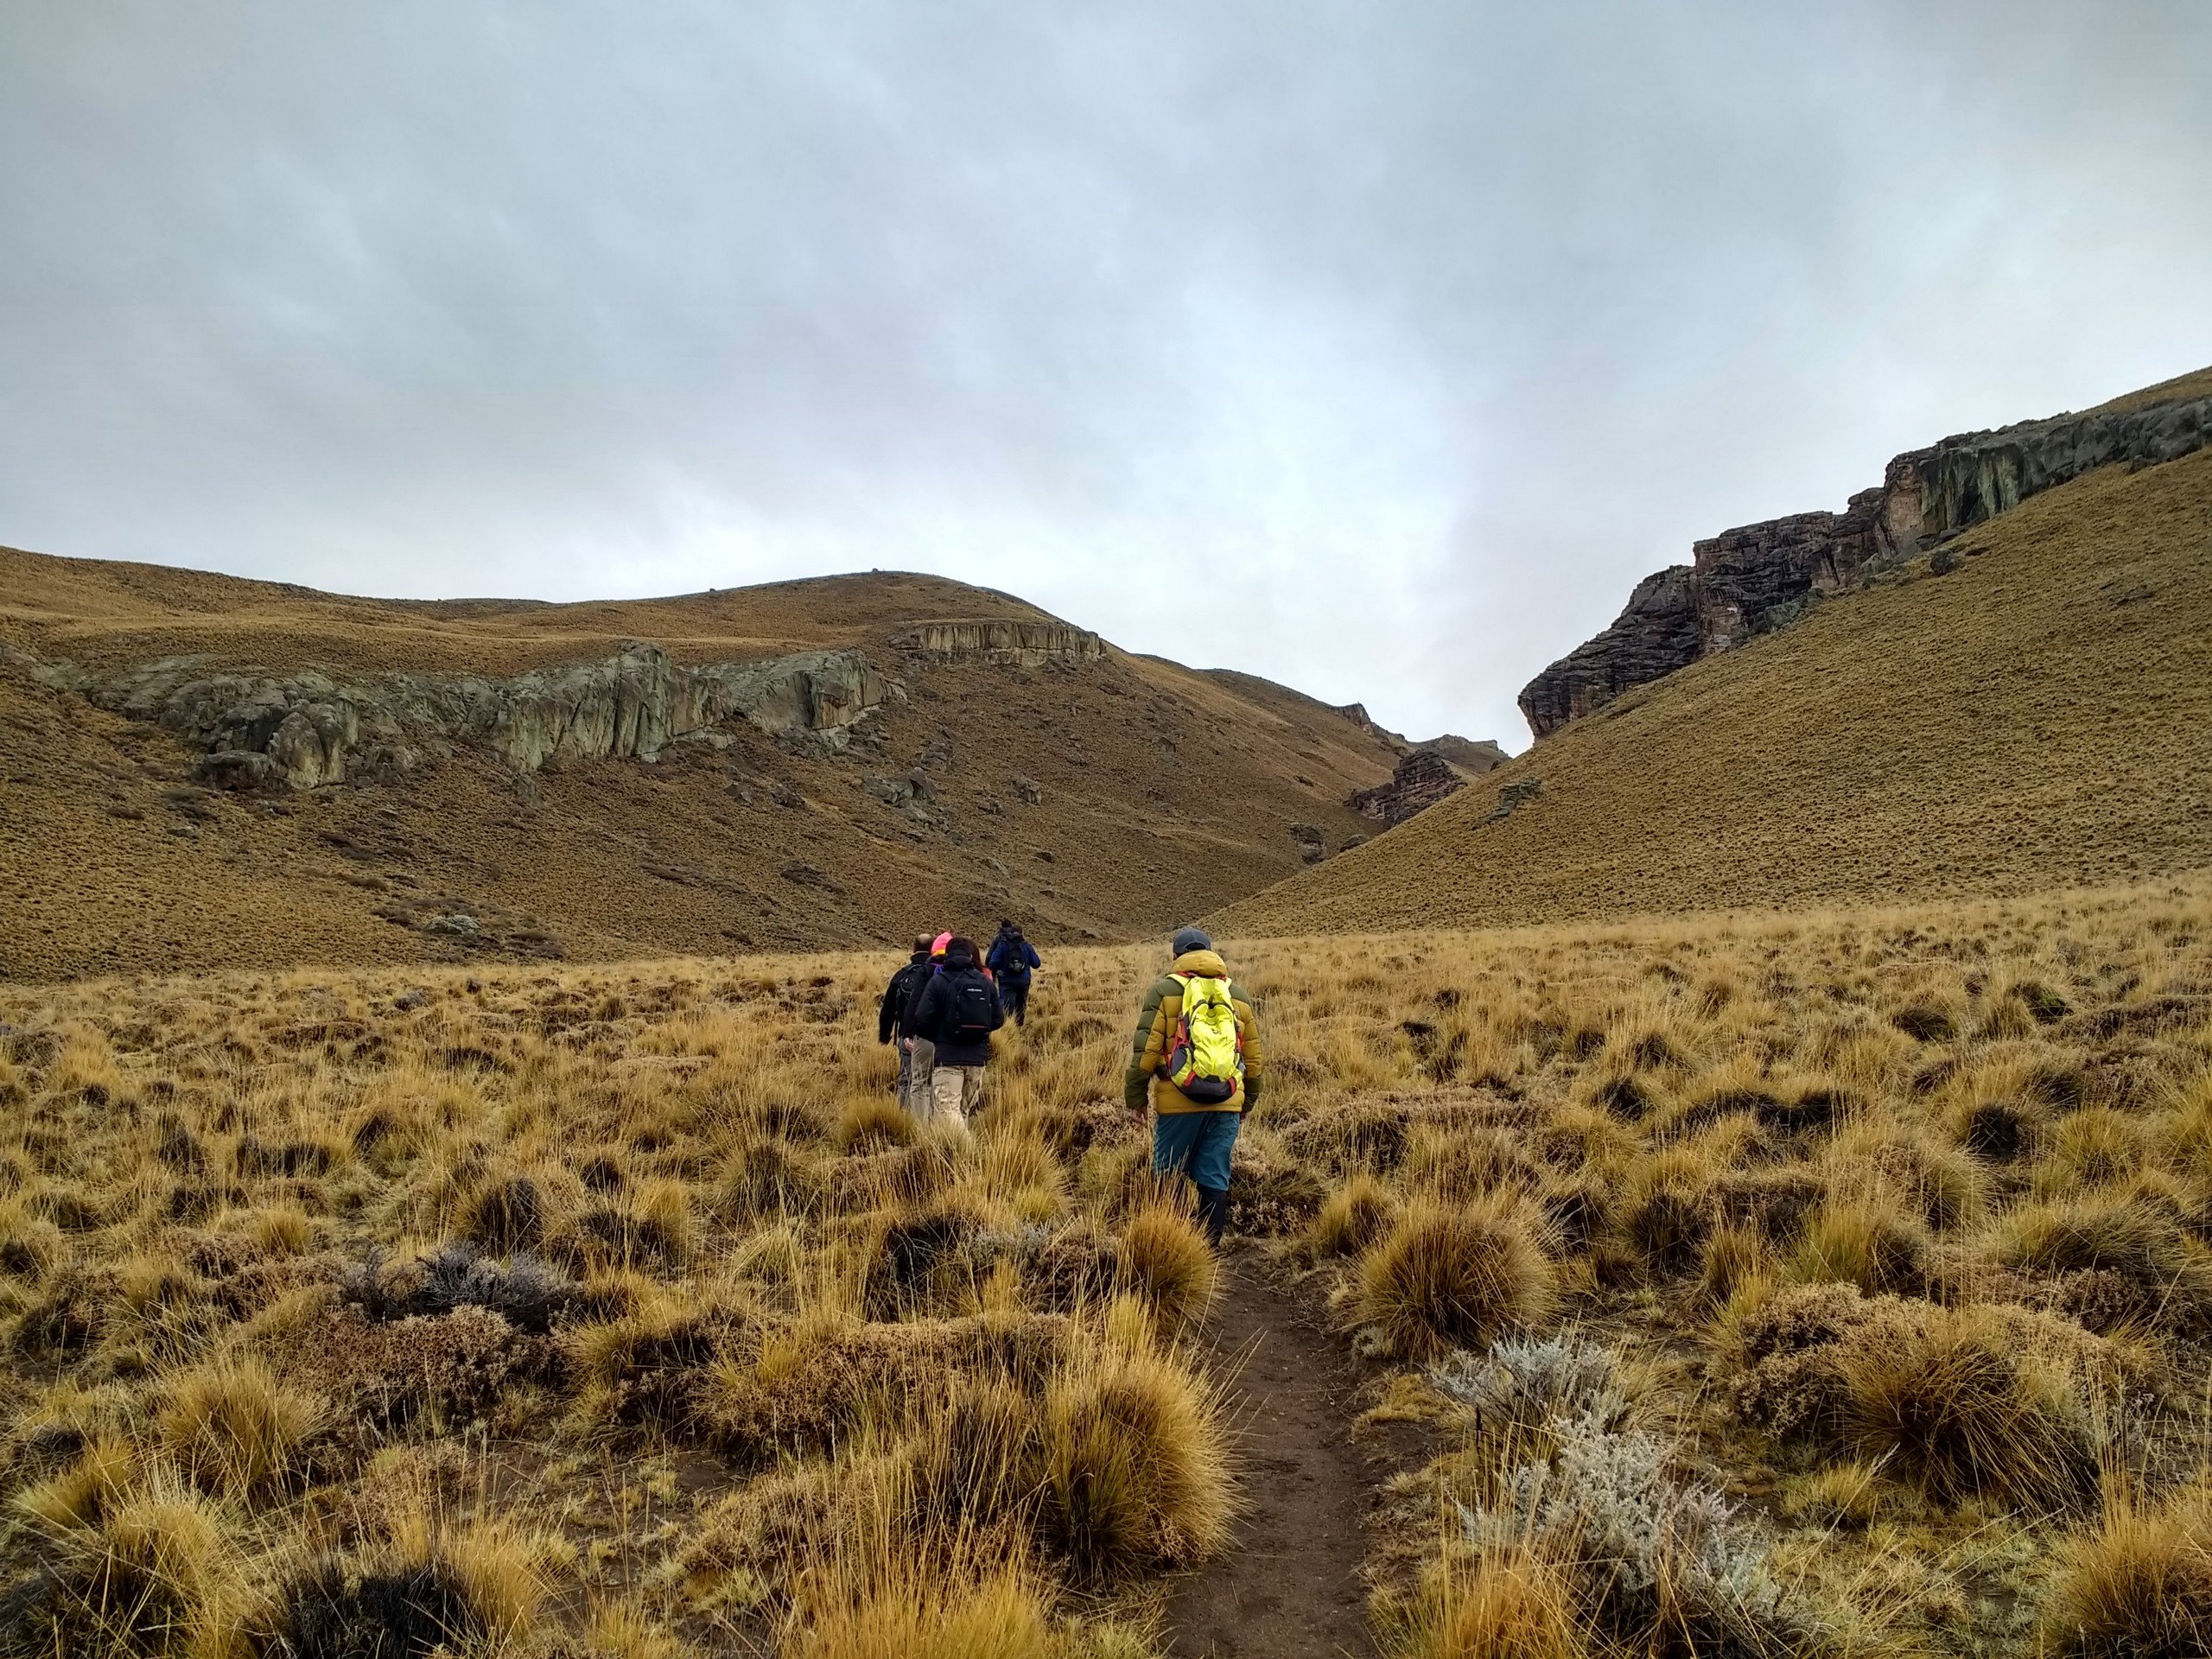 Vast meadows in Chilean Andes